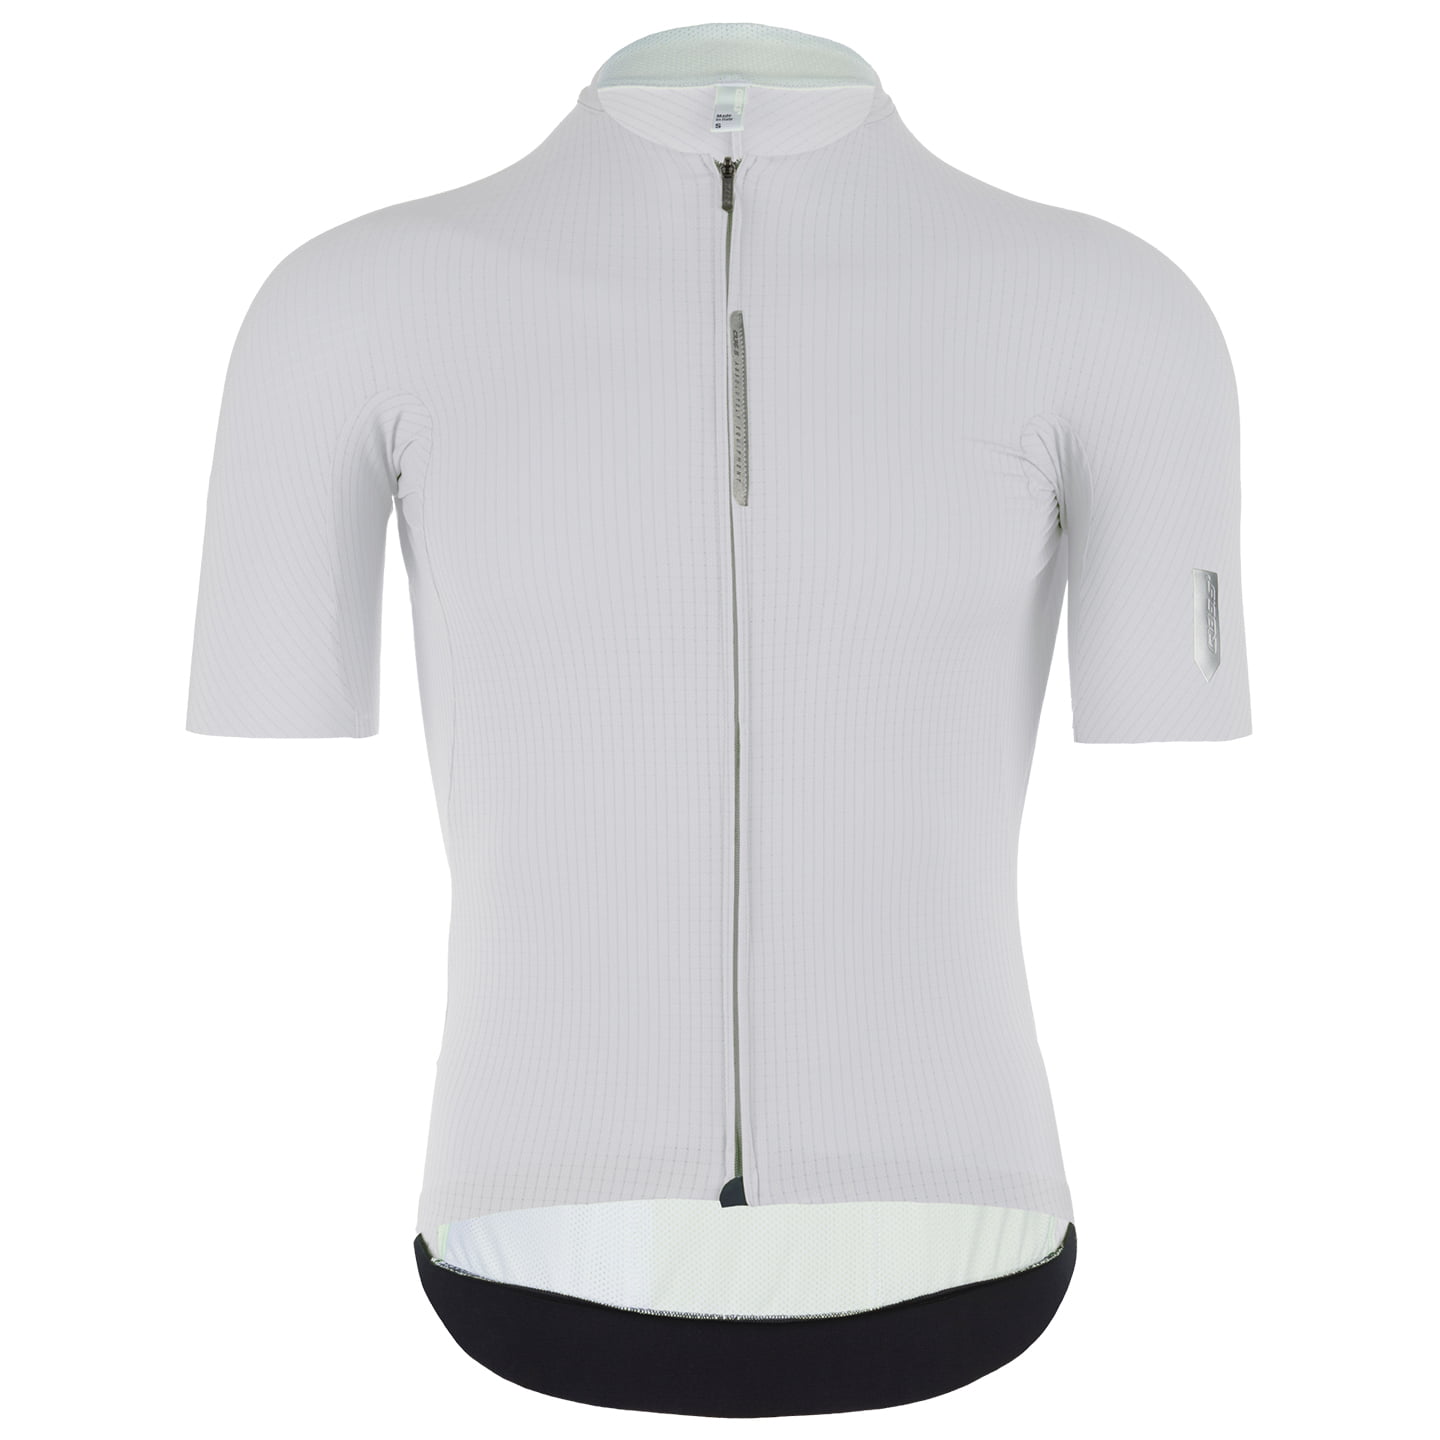 Q36.5 Pinstripe Pro Short Sleeve Jersey, for men, size S, Cycling jersey, Cycling clothing